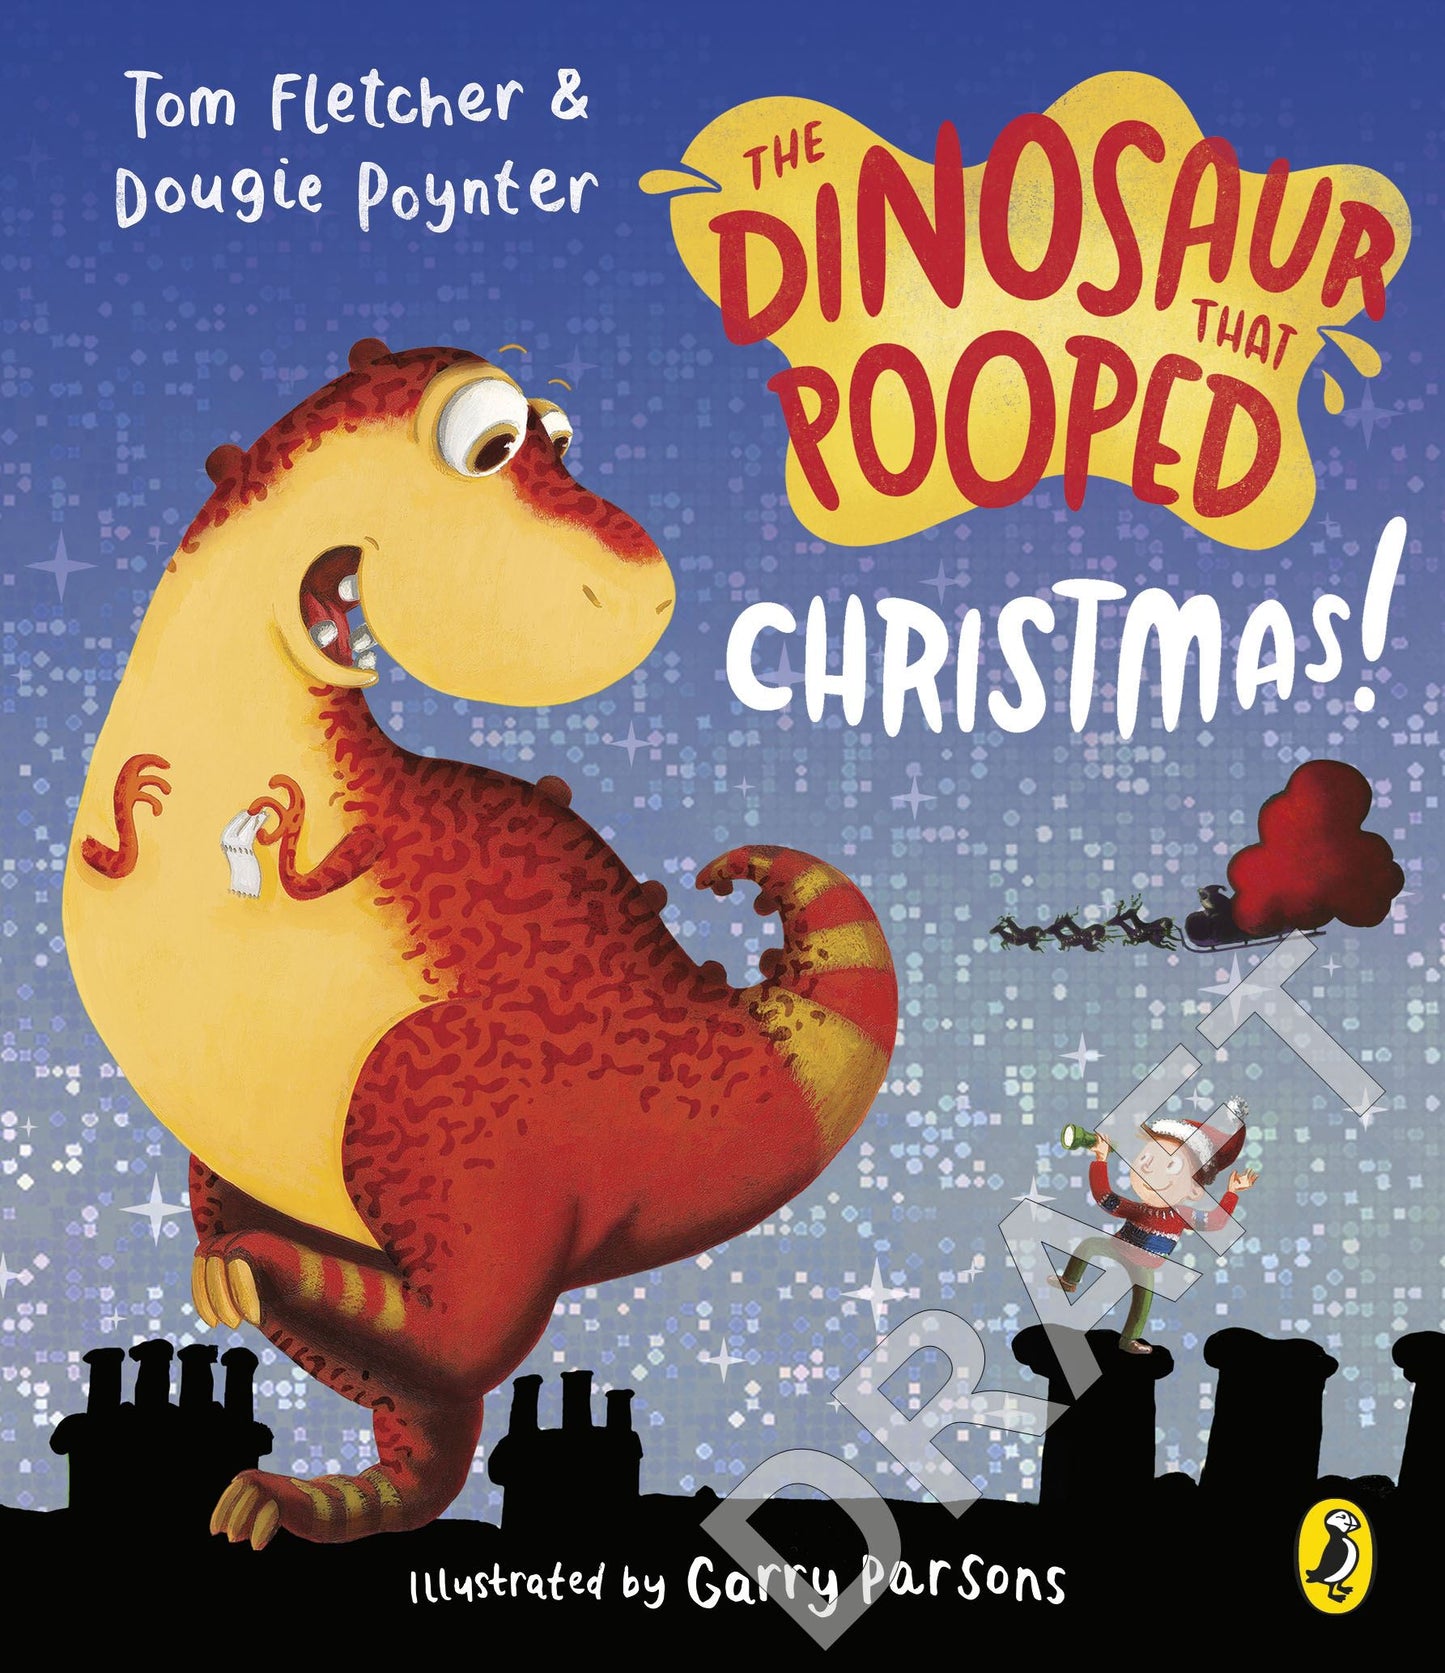 The Dinosaur that pooped Christmas